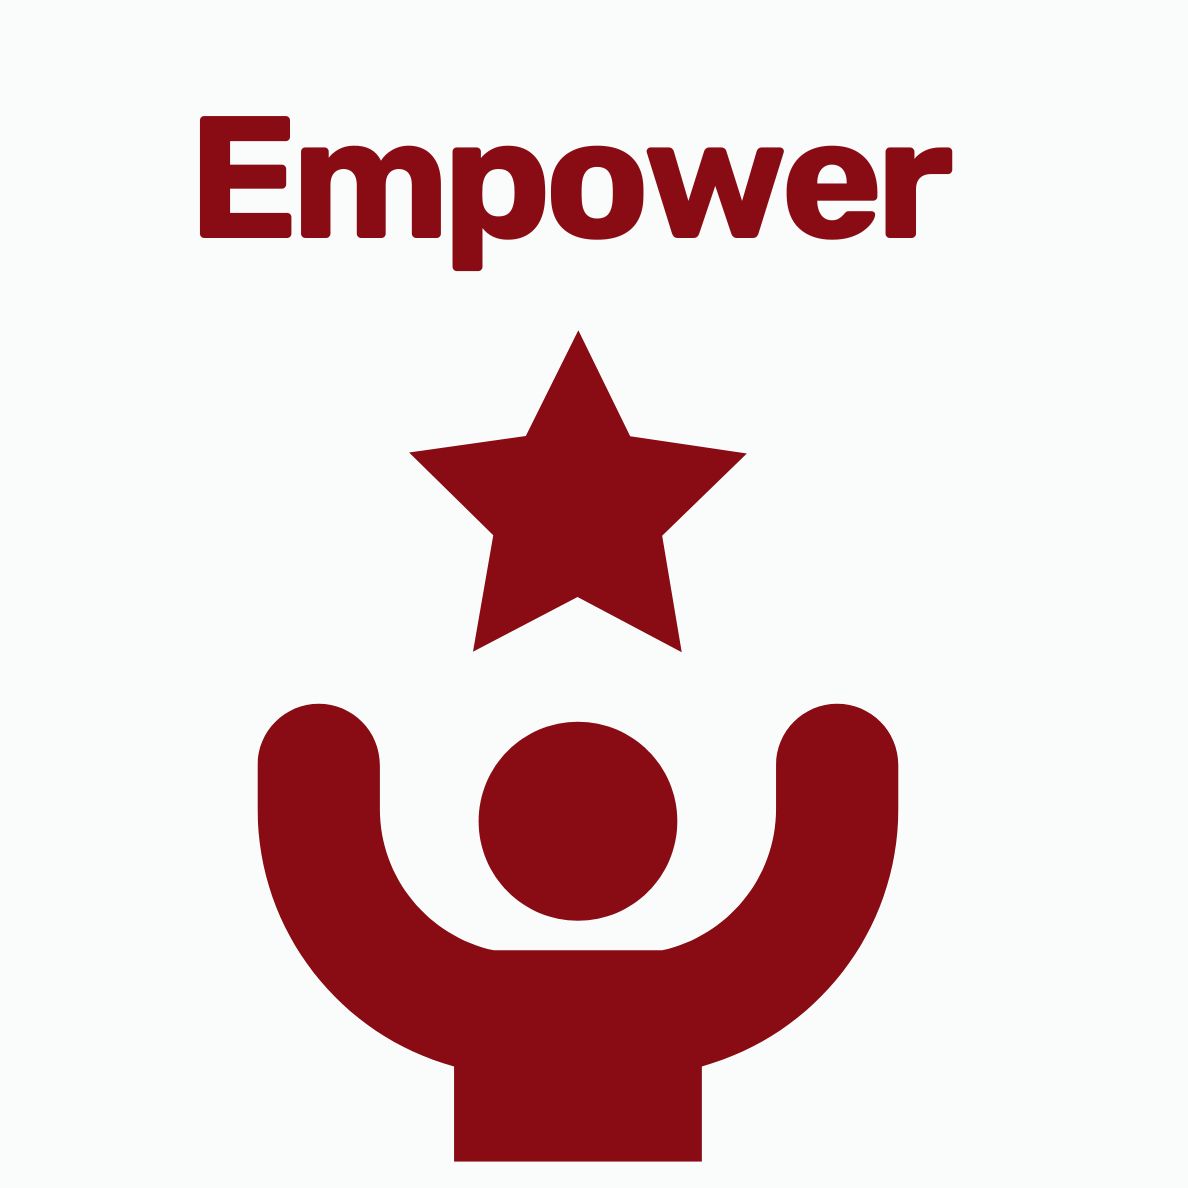 charlie's gift symbol for empowerment